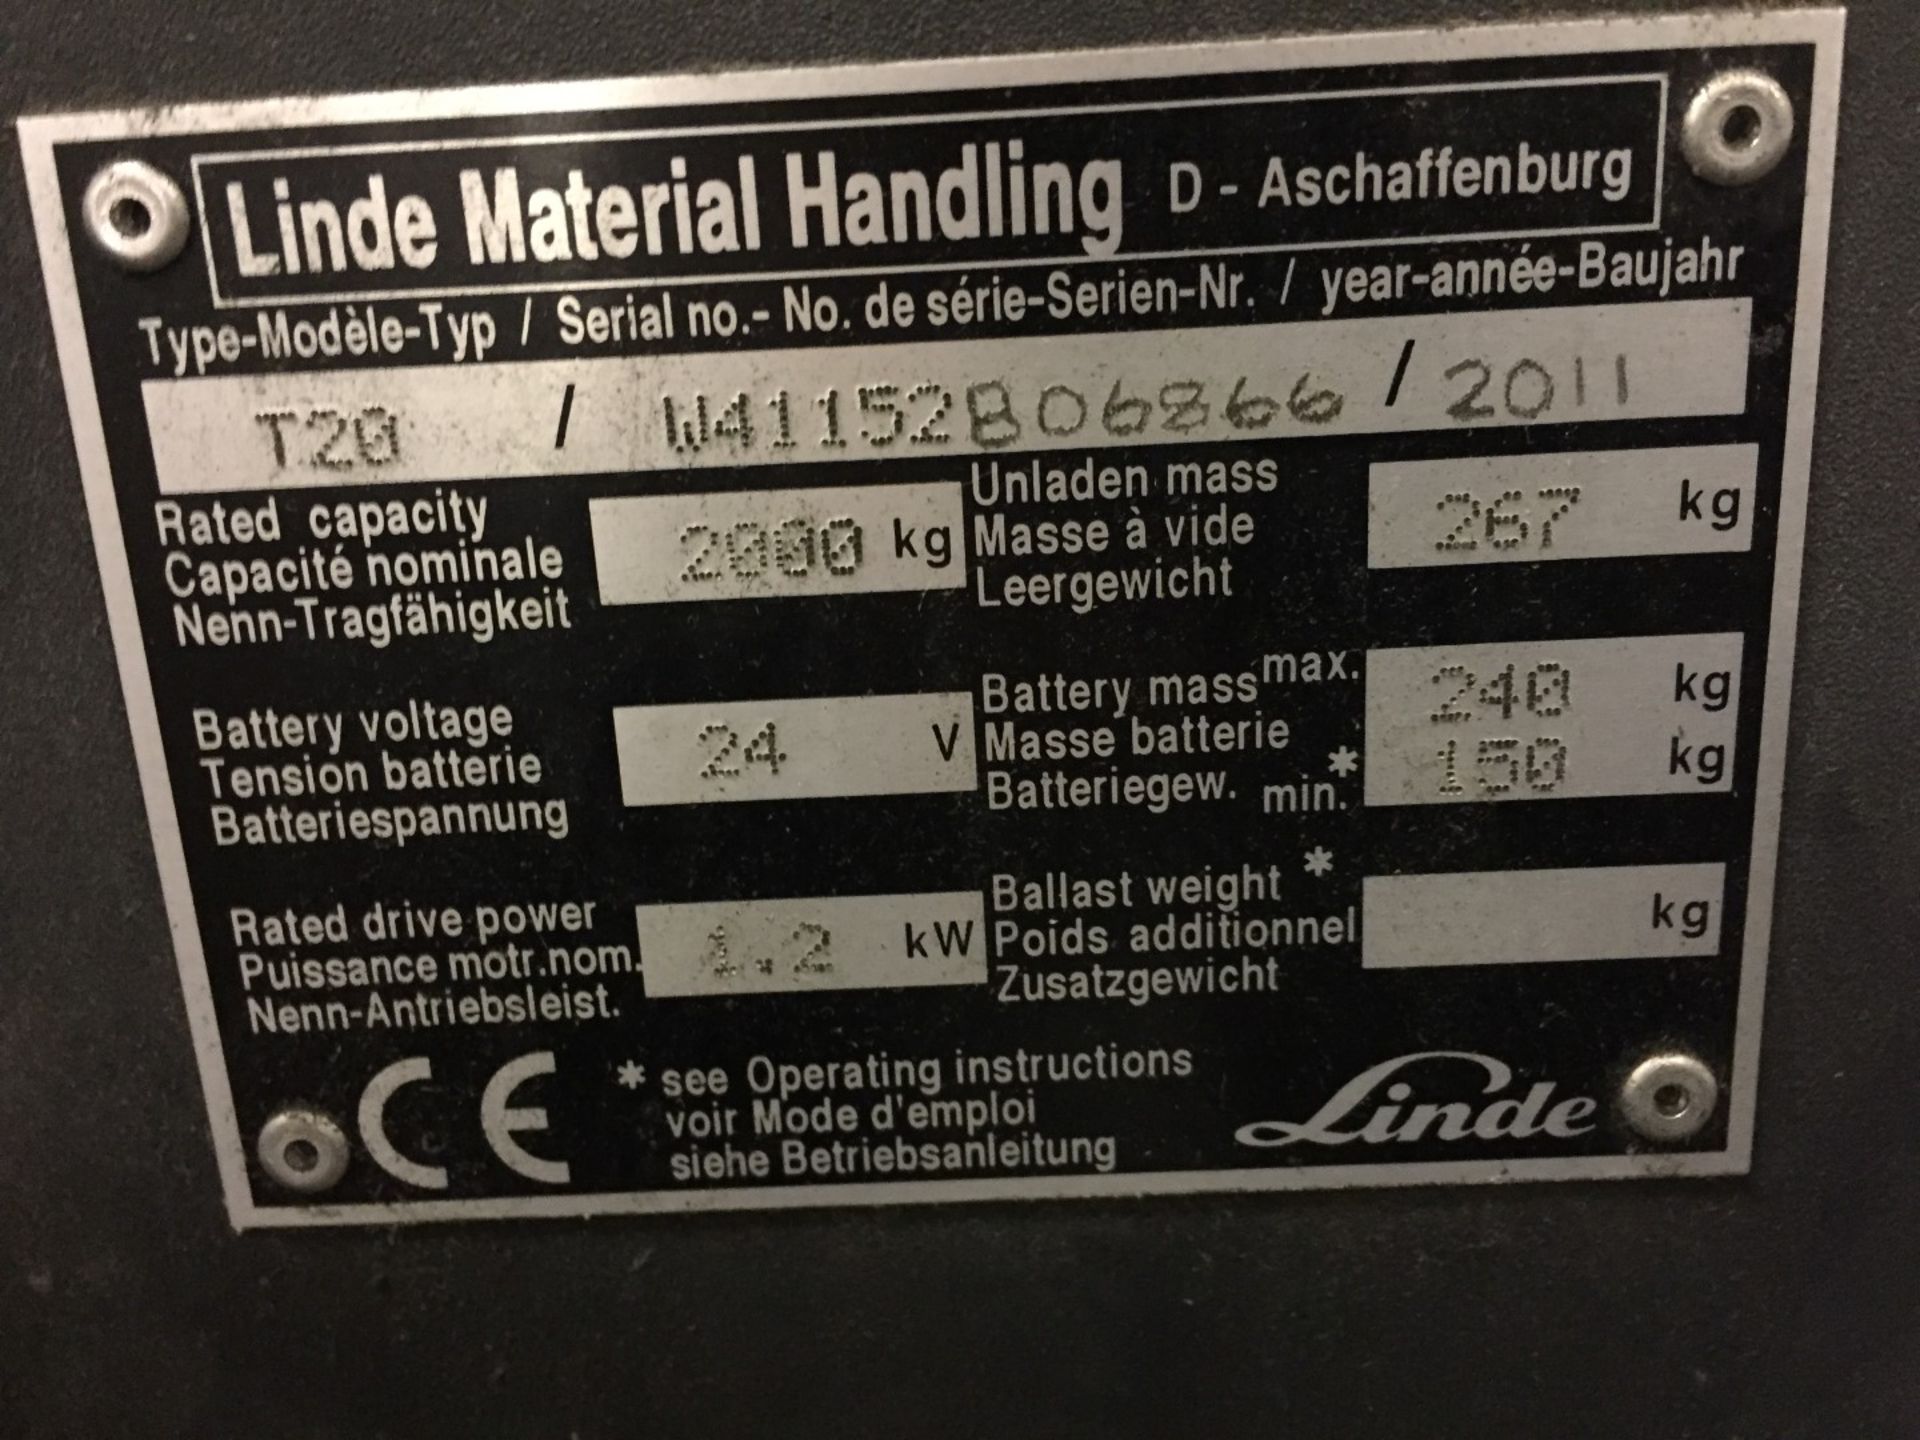 1 x Linde T20 Electric Pallet Truck - Tested and Working - Charger Included - CL007 - Ref: T20/1 - - Image 10 of 12